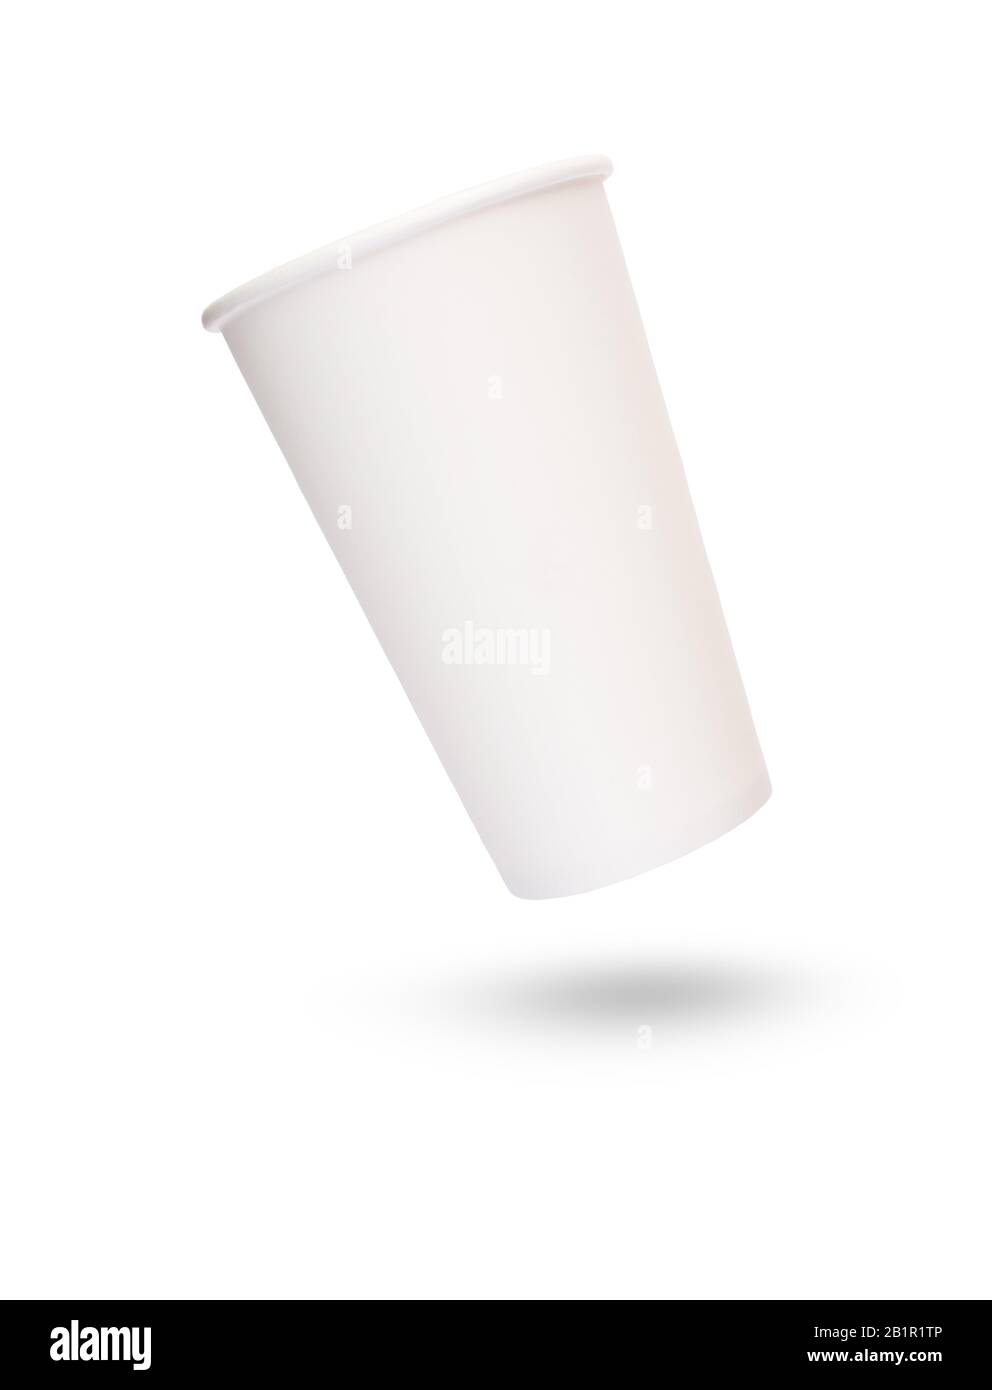 https://c8.alamy.com/comp/2B1R1TP/white-paper-cup-for-drinks-isolated-on-a-white-background-2B1R1TP.jpg